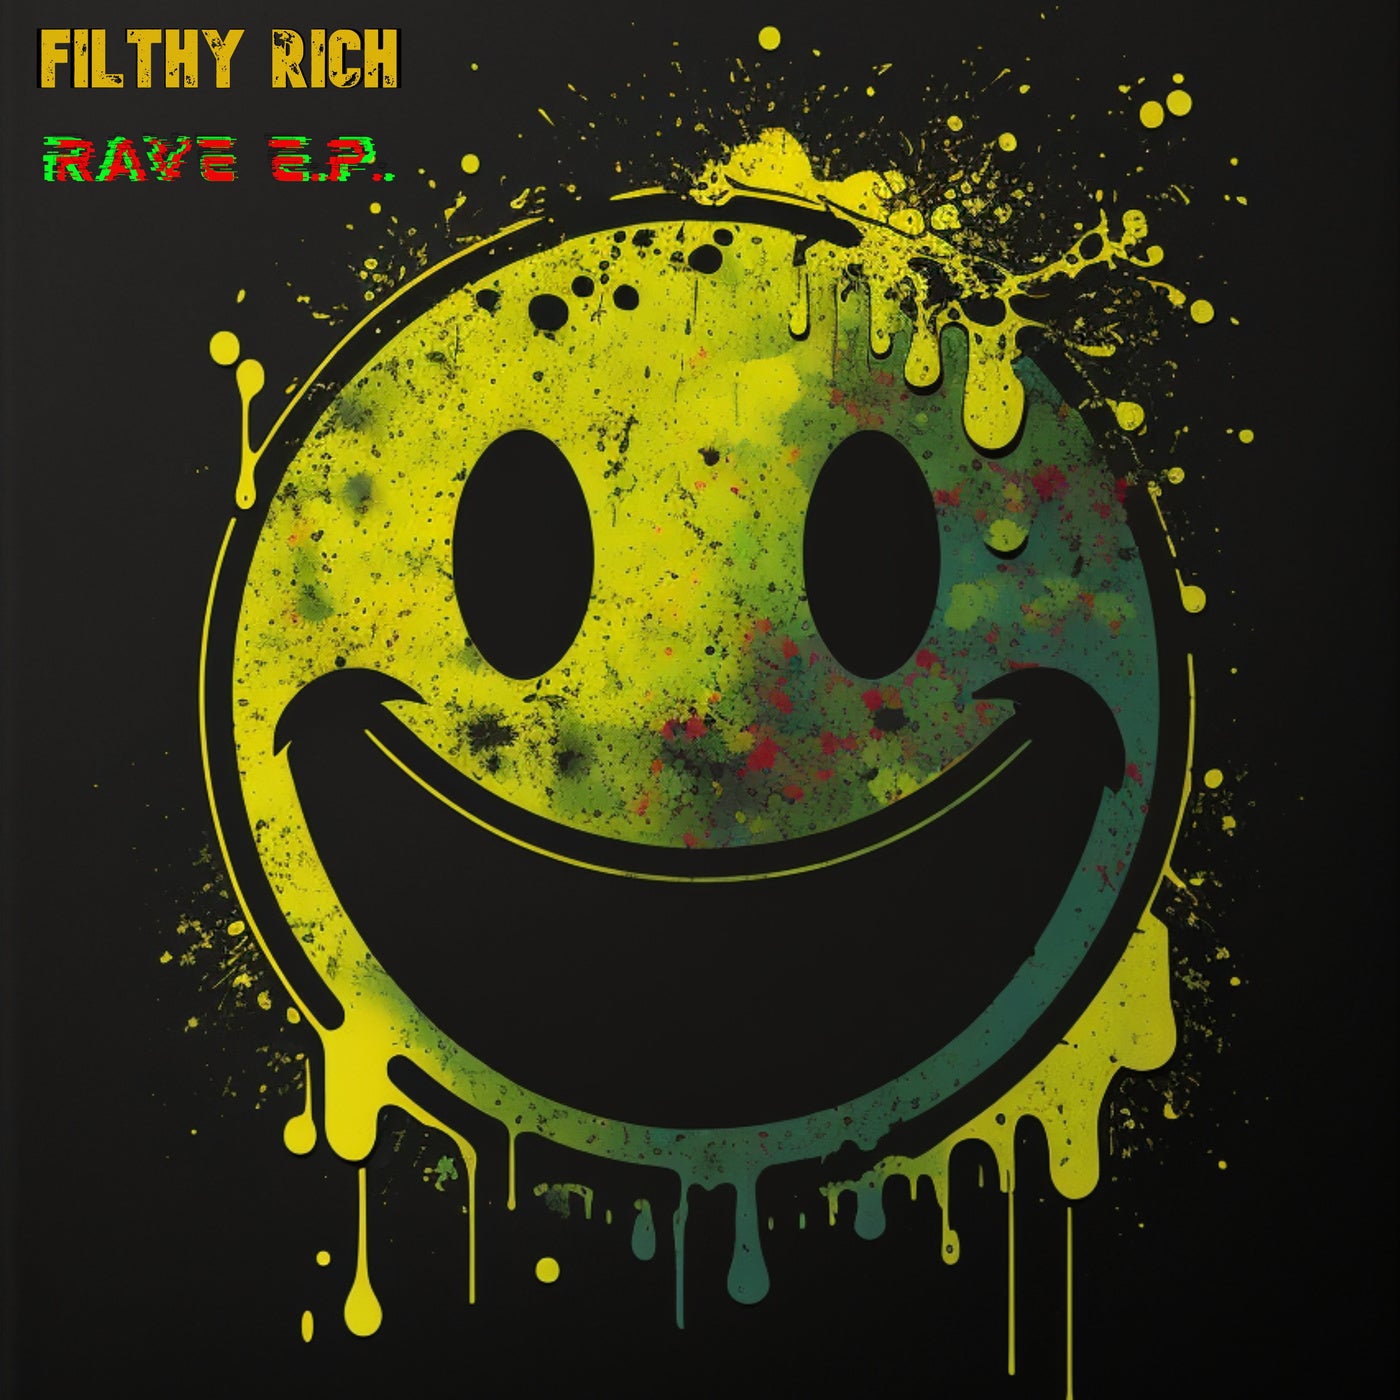 Filthy Rich Music & Downloads on Beatport